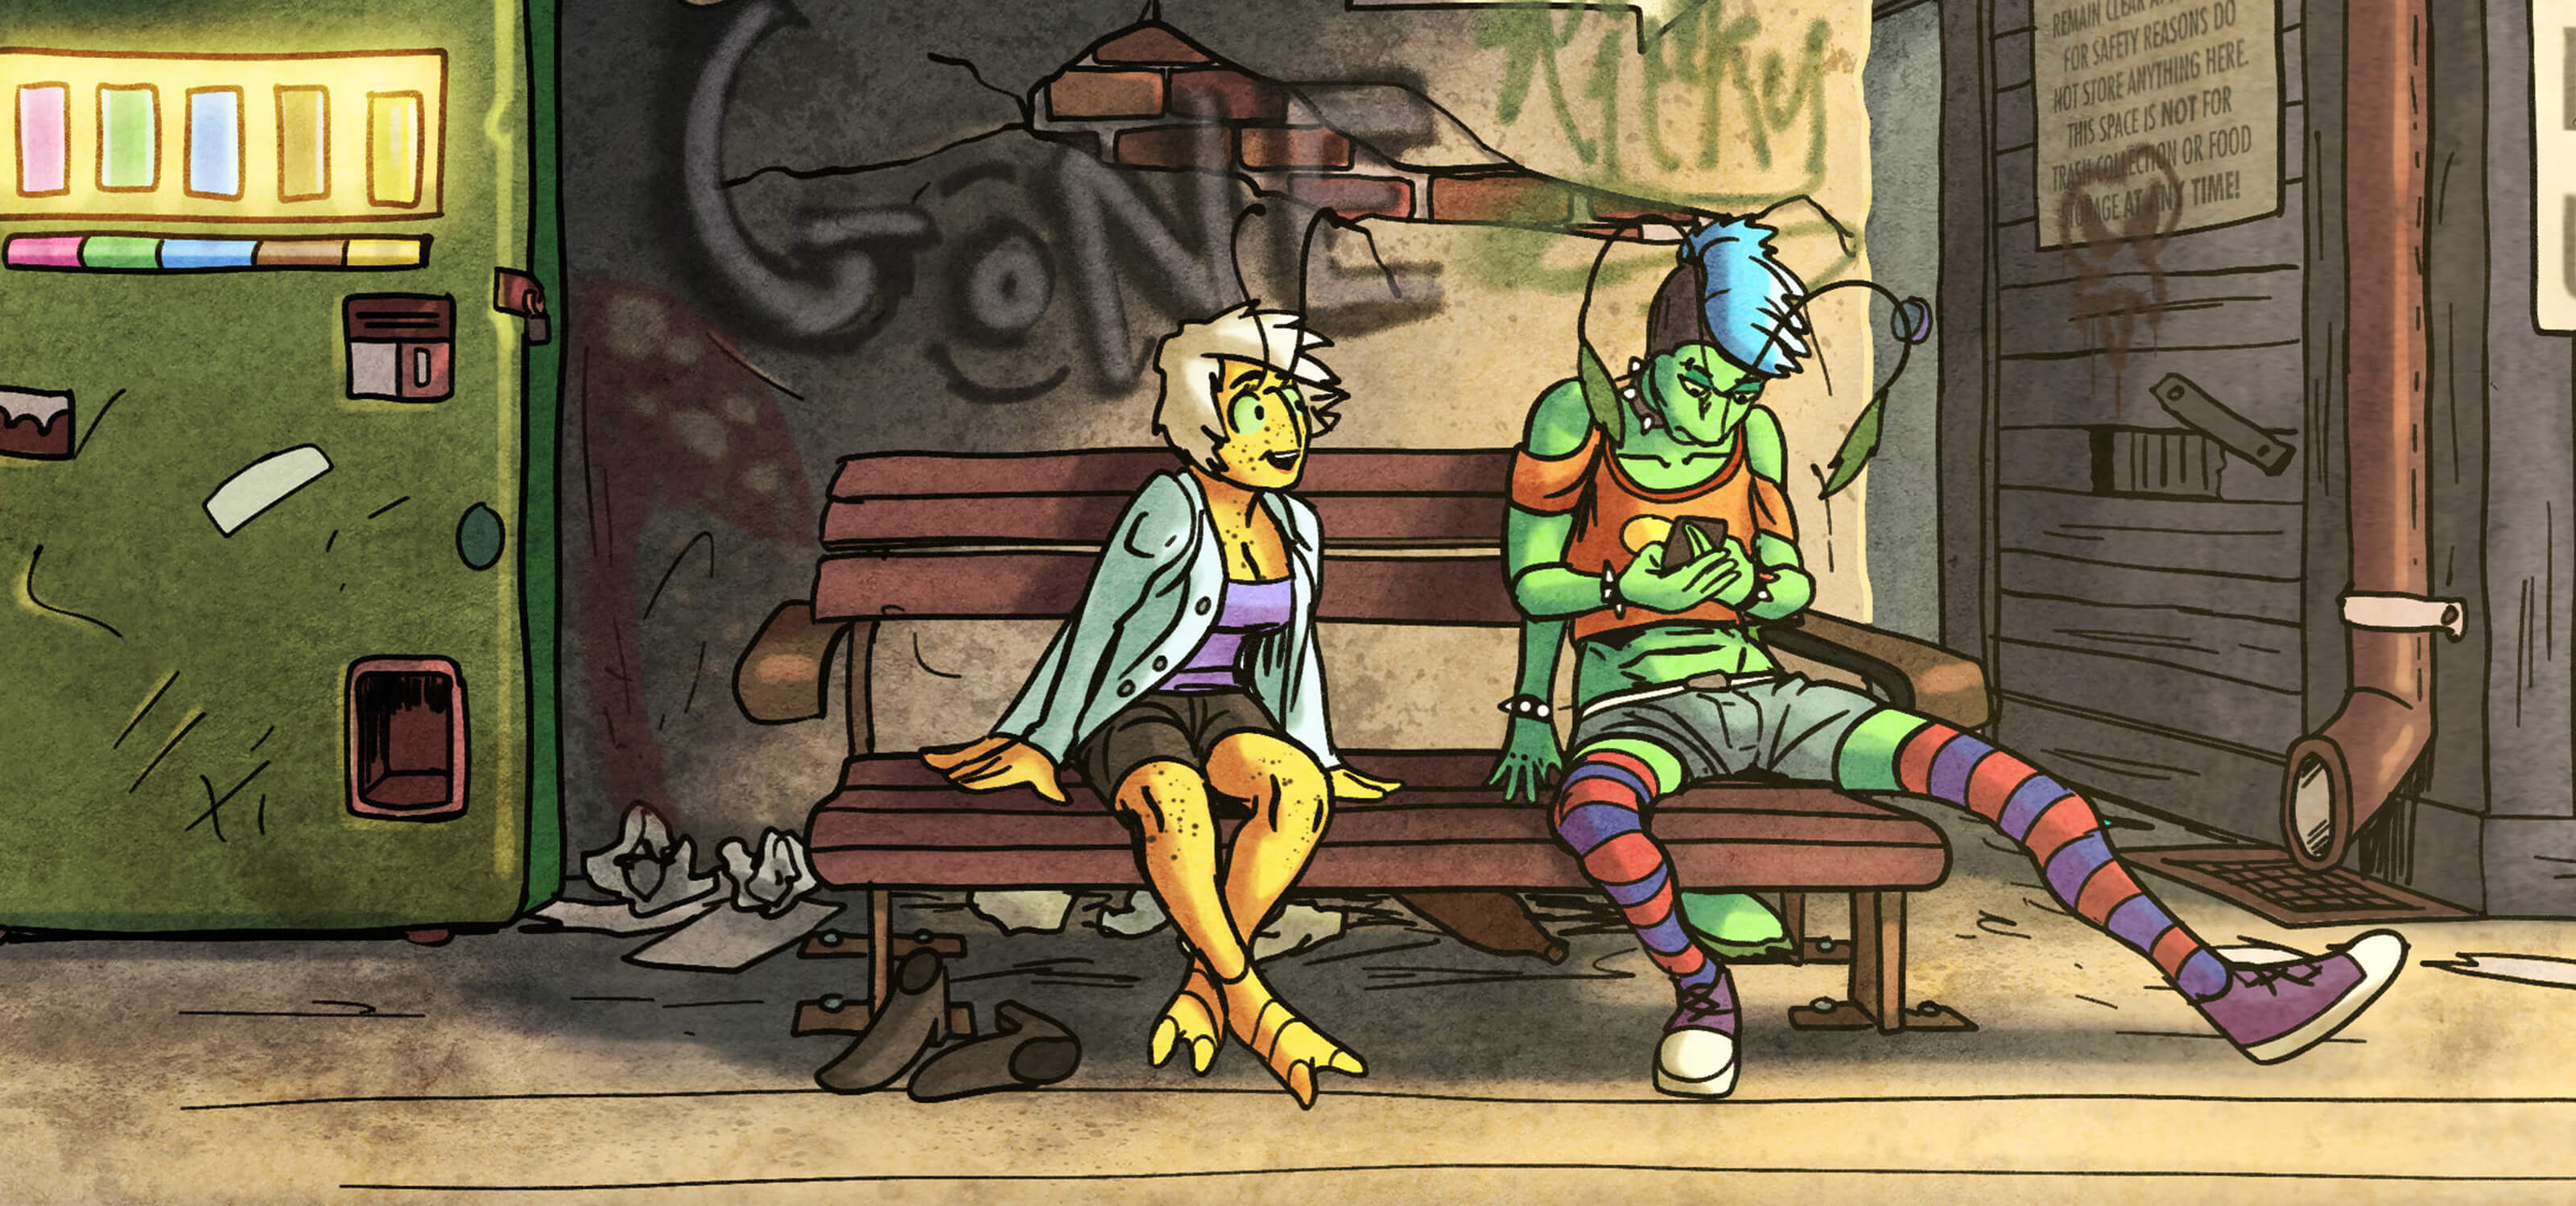 Two bugs from the “Coleary” graphic novel sit next to each other on a city bench.